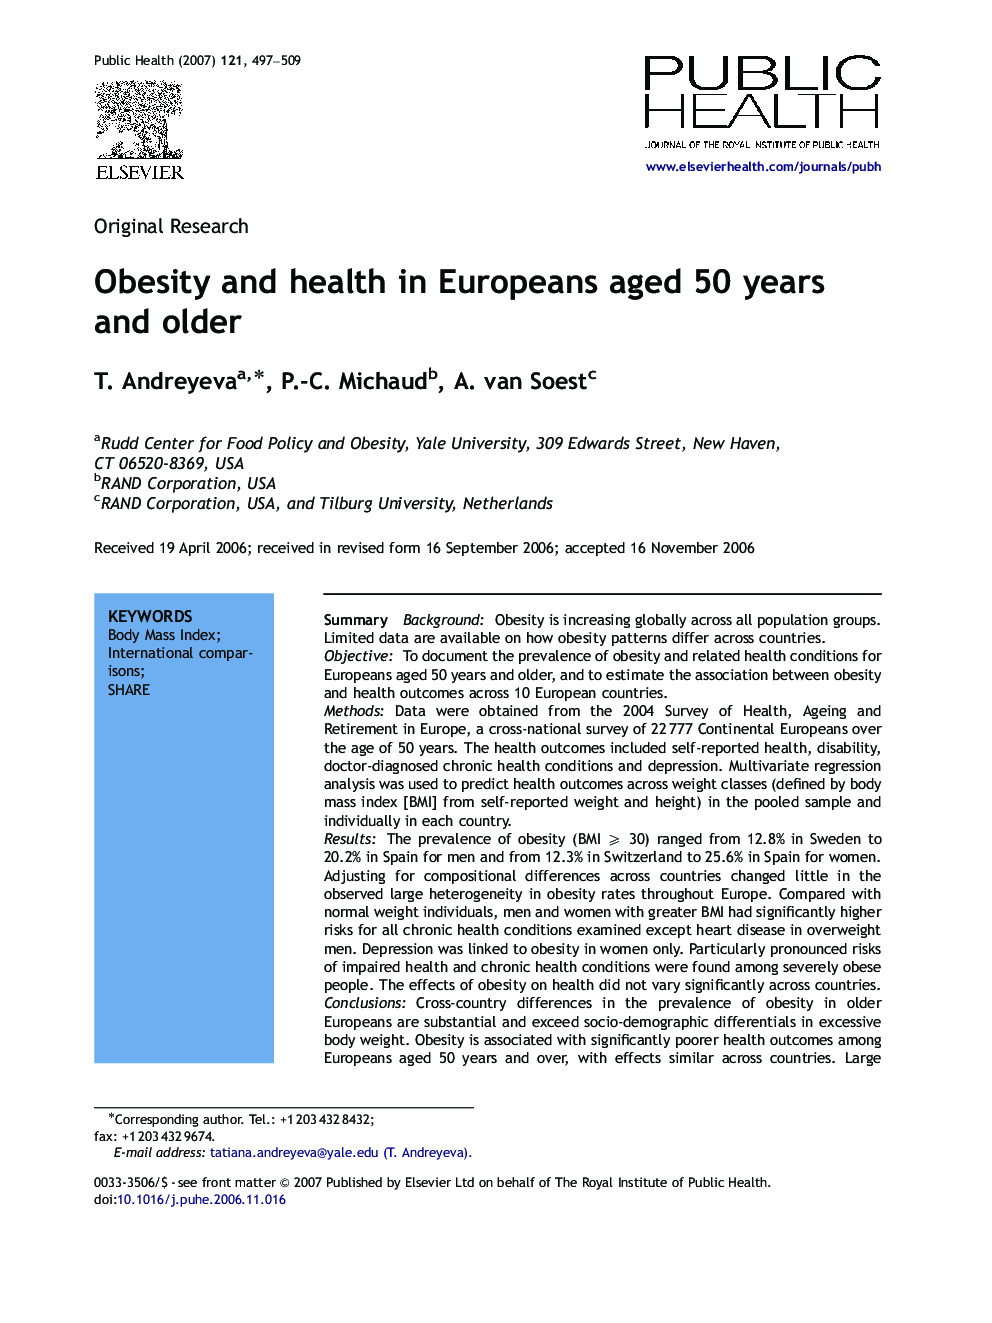 Obesity and health in Europeans aged 50 years and older